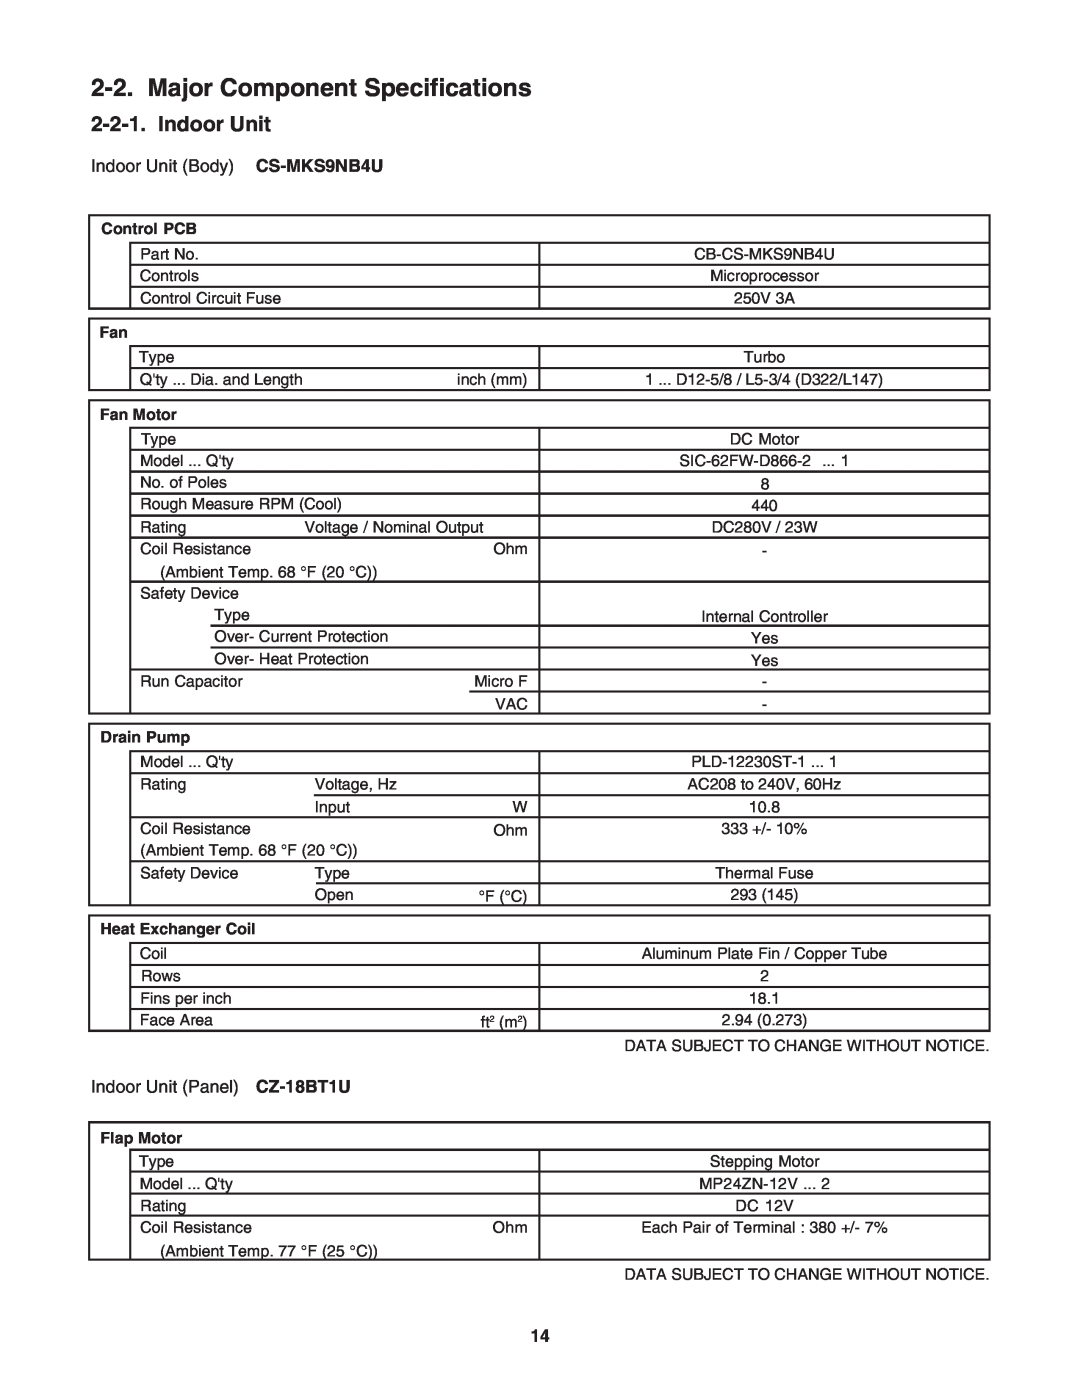 Panasonic R410A service manual Major Component Specifications, Indoor Unit 